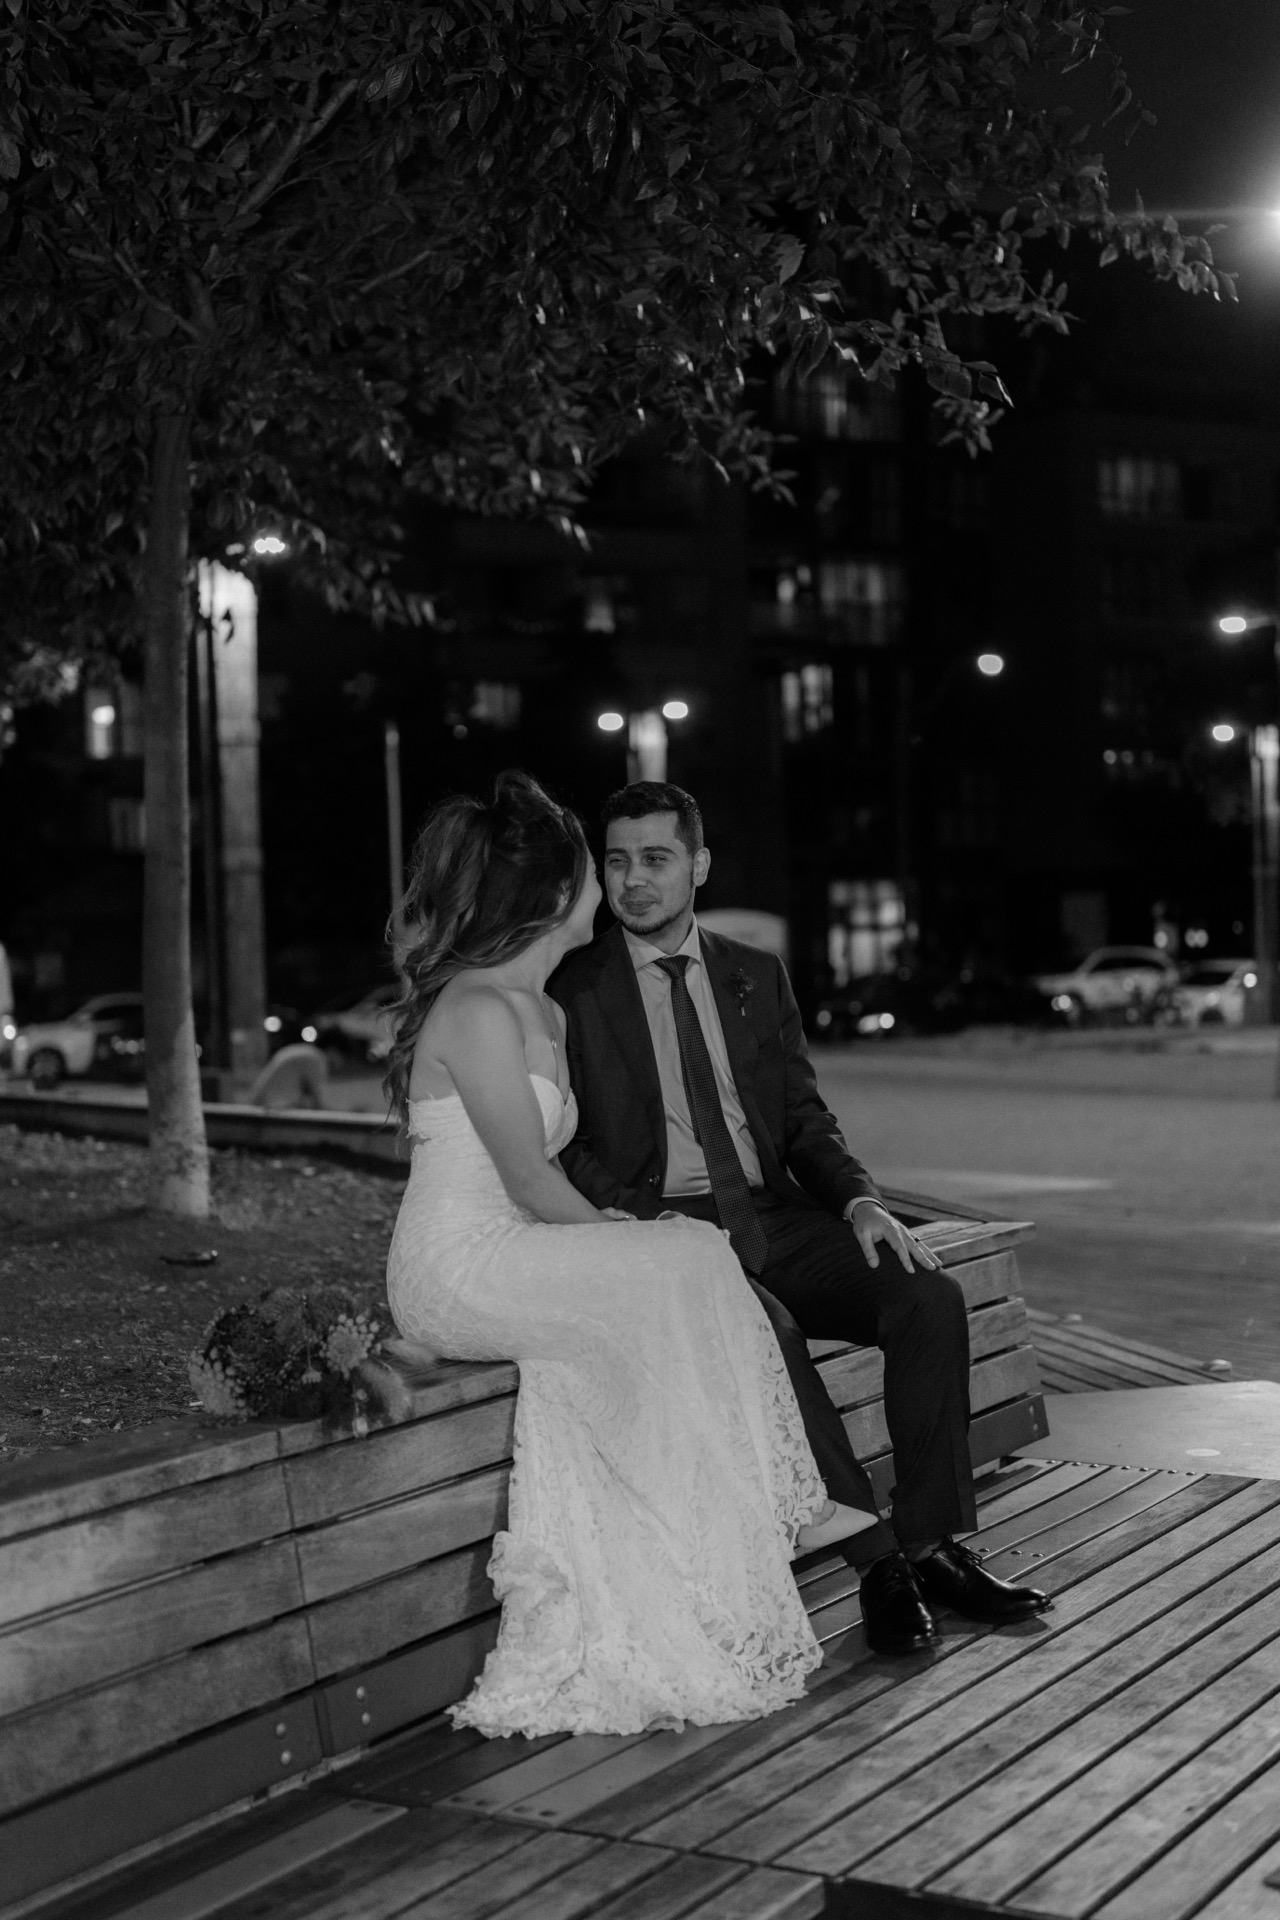 A couple in wedding attire sitting together on a bench at night